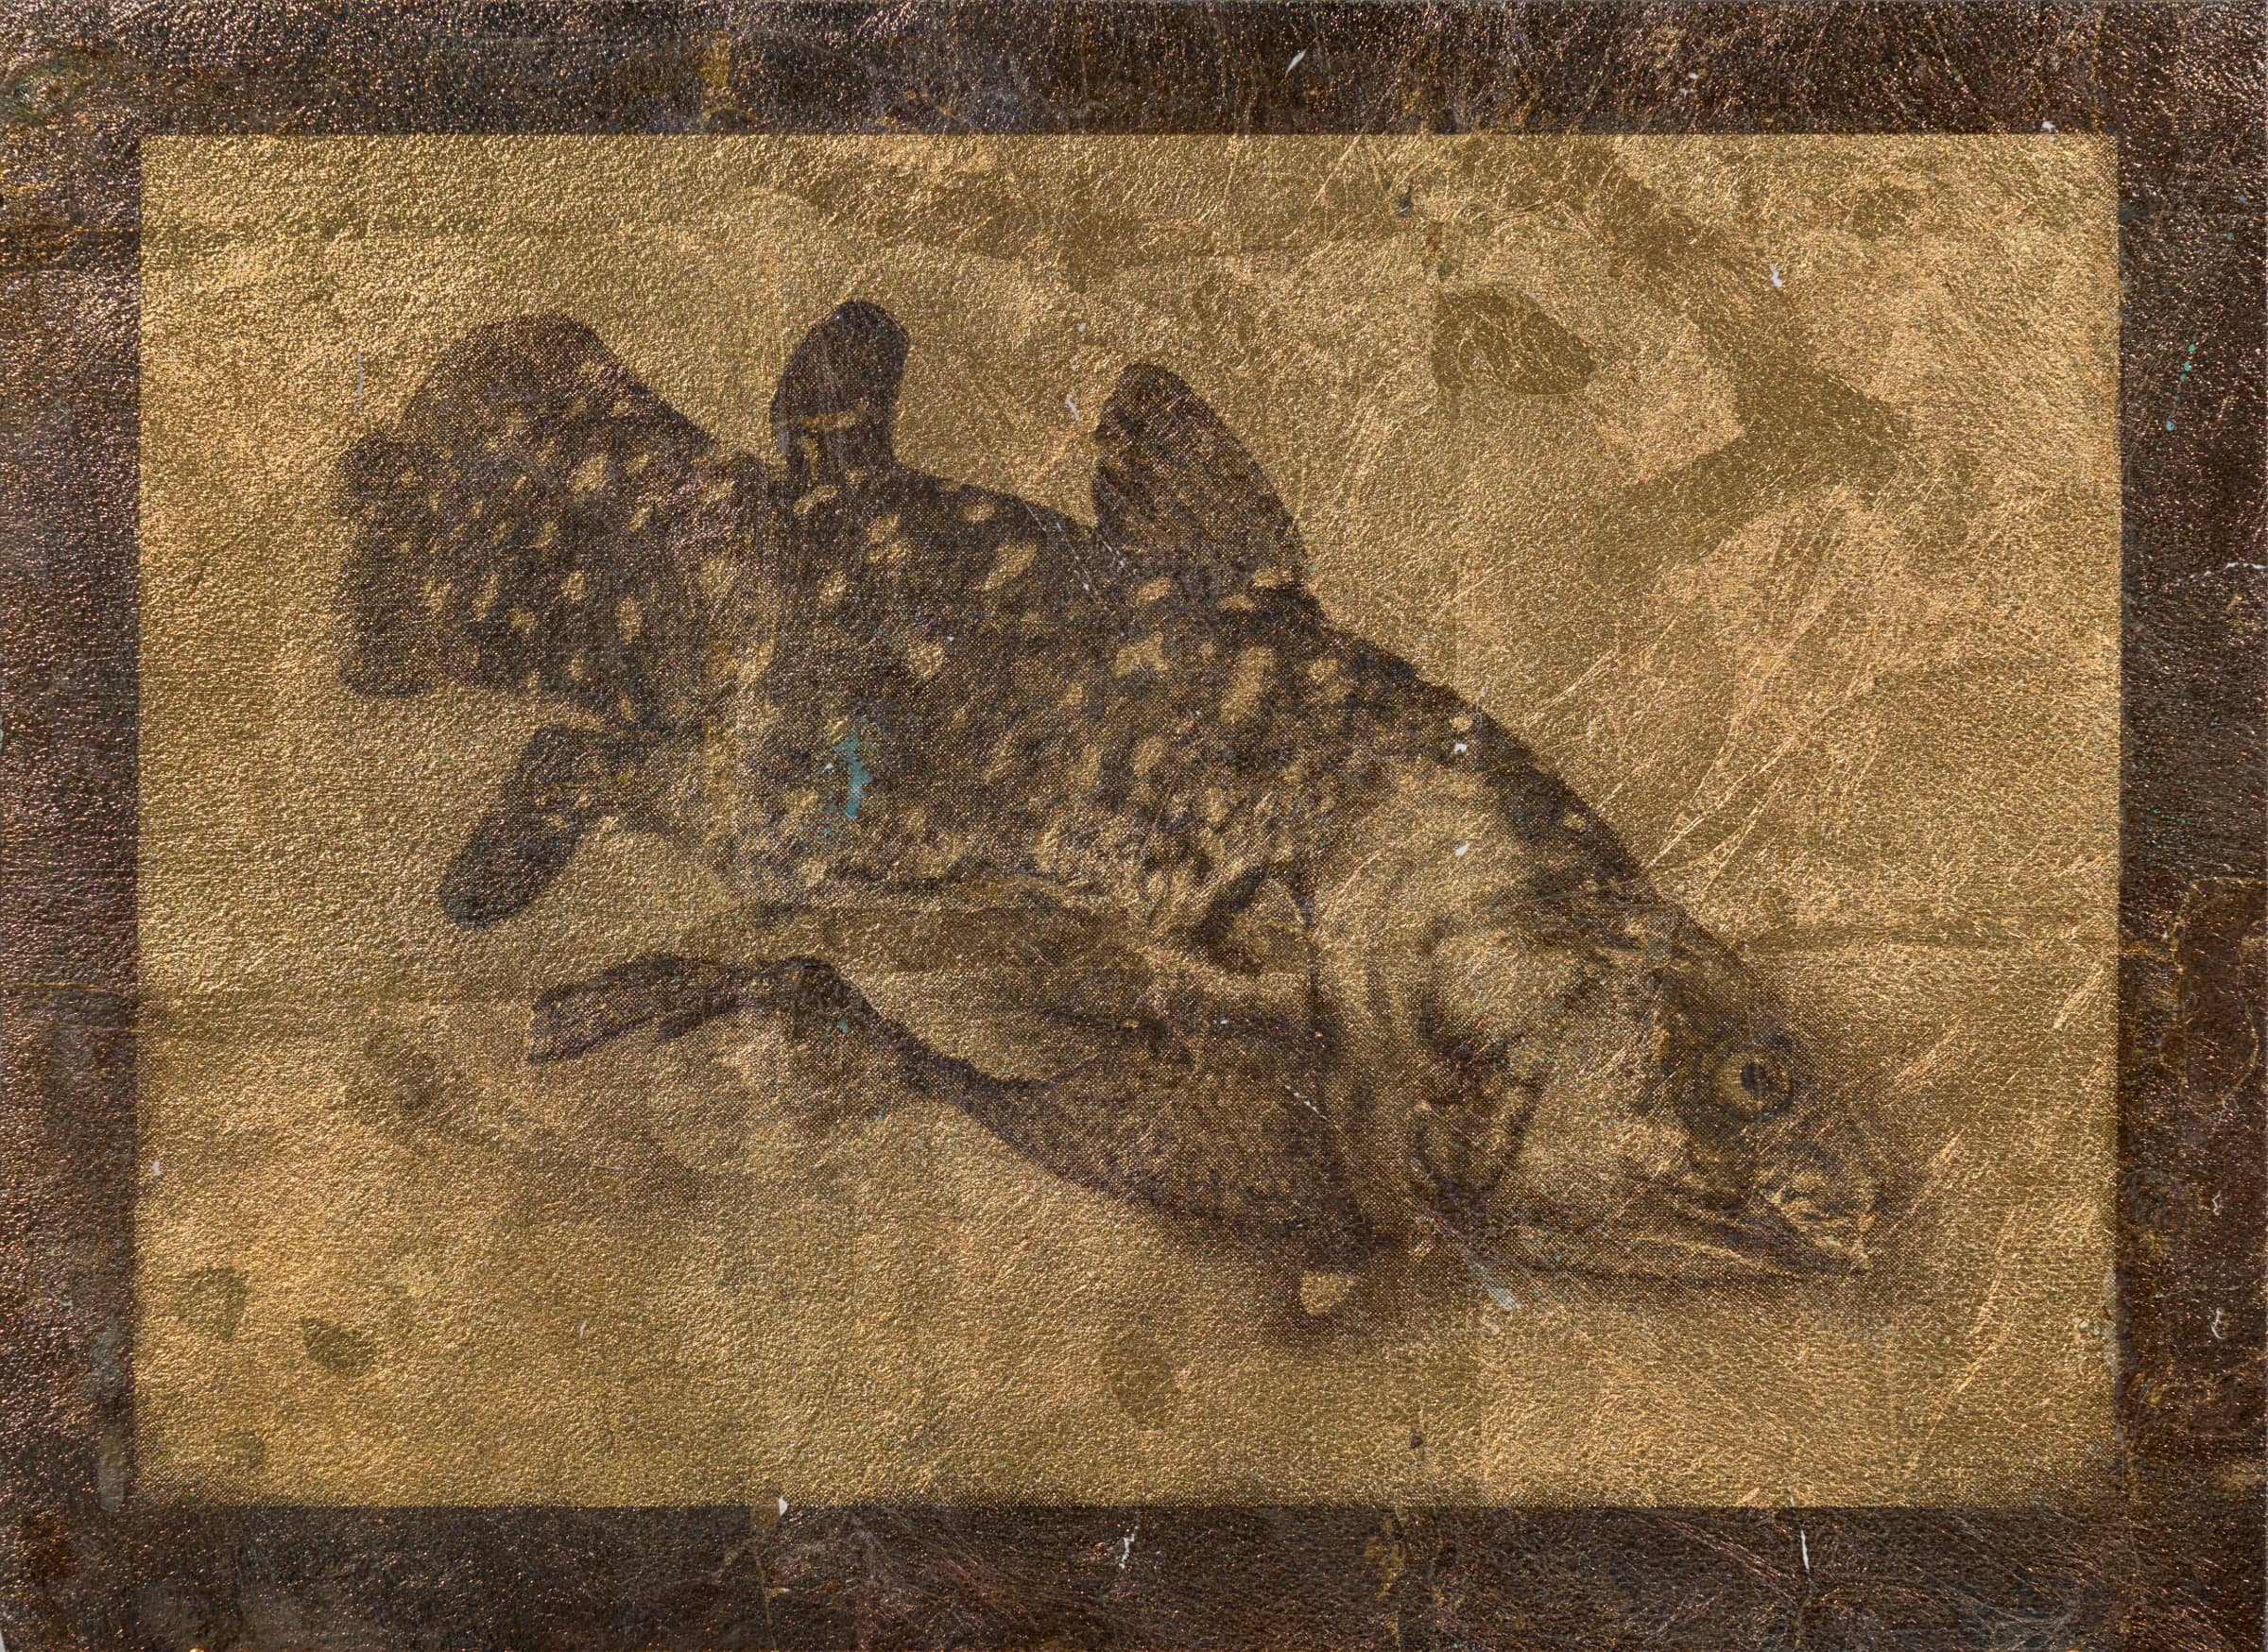 24_Roman Moriceau_Coelacanthe_2022_gilded copper, recycled silver salts, varnish on paper_30x40cm_Shivadas de Schrijver_1